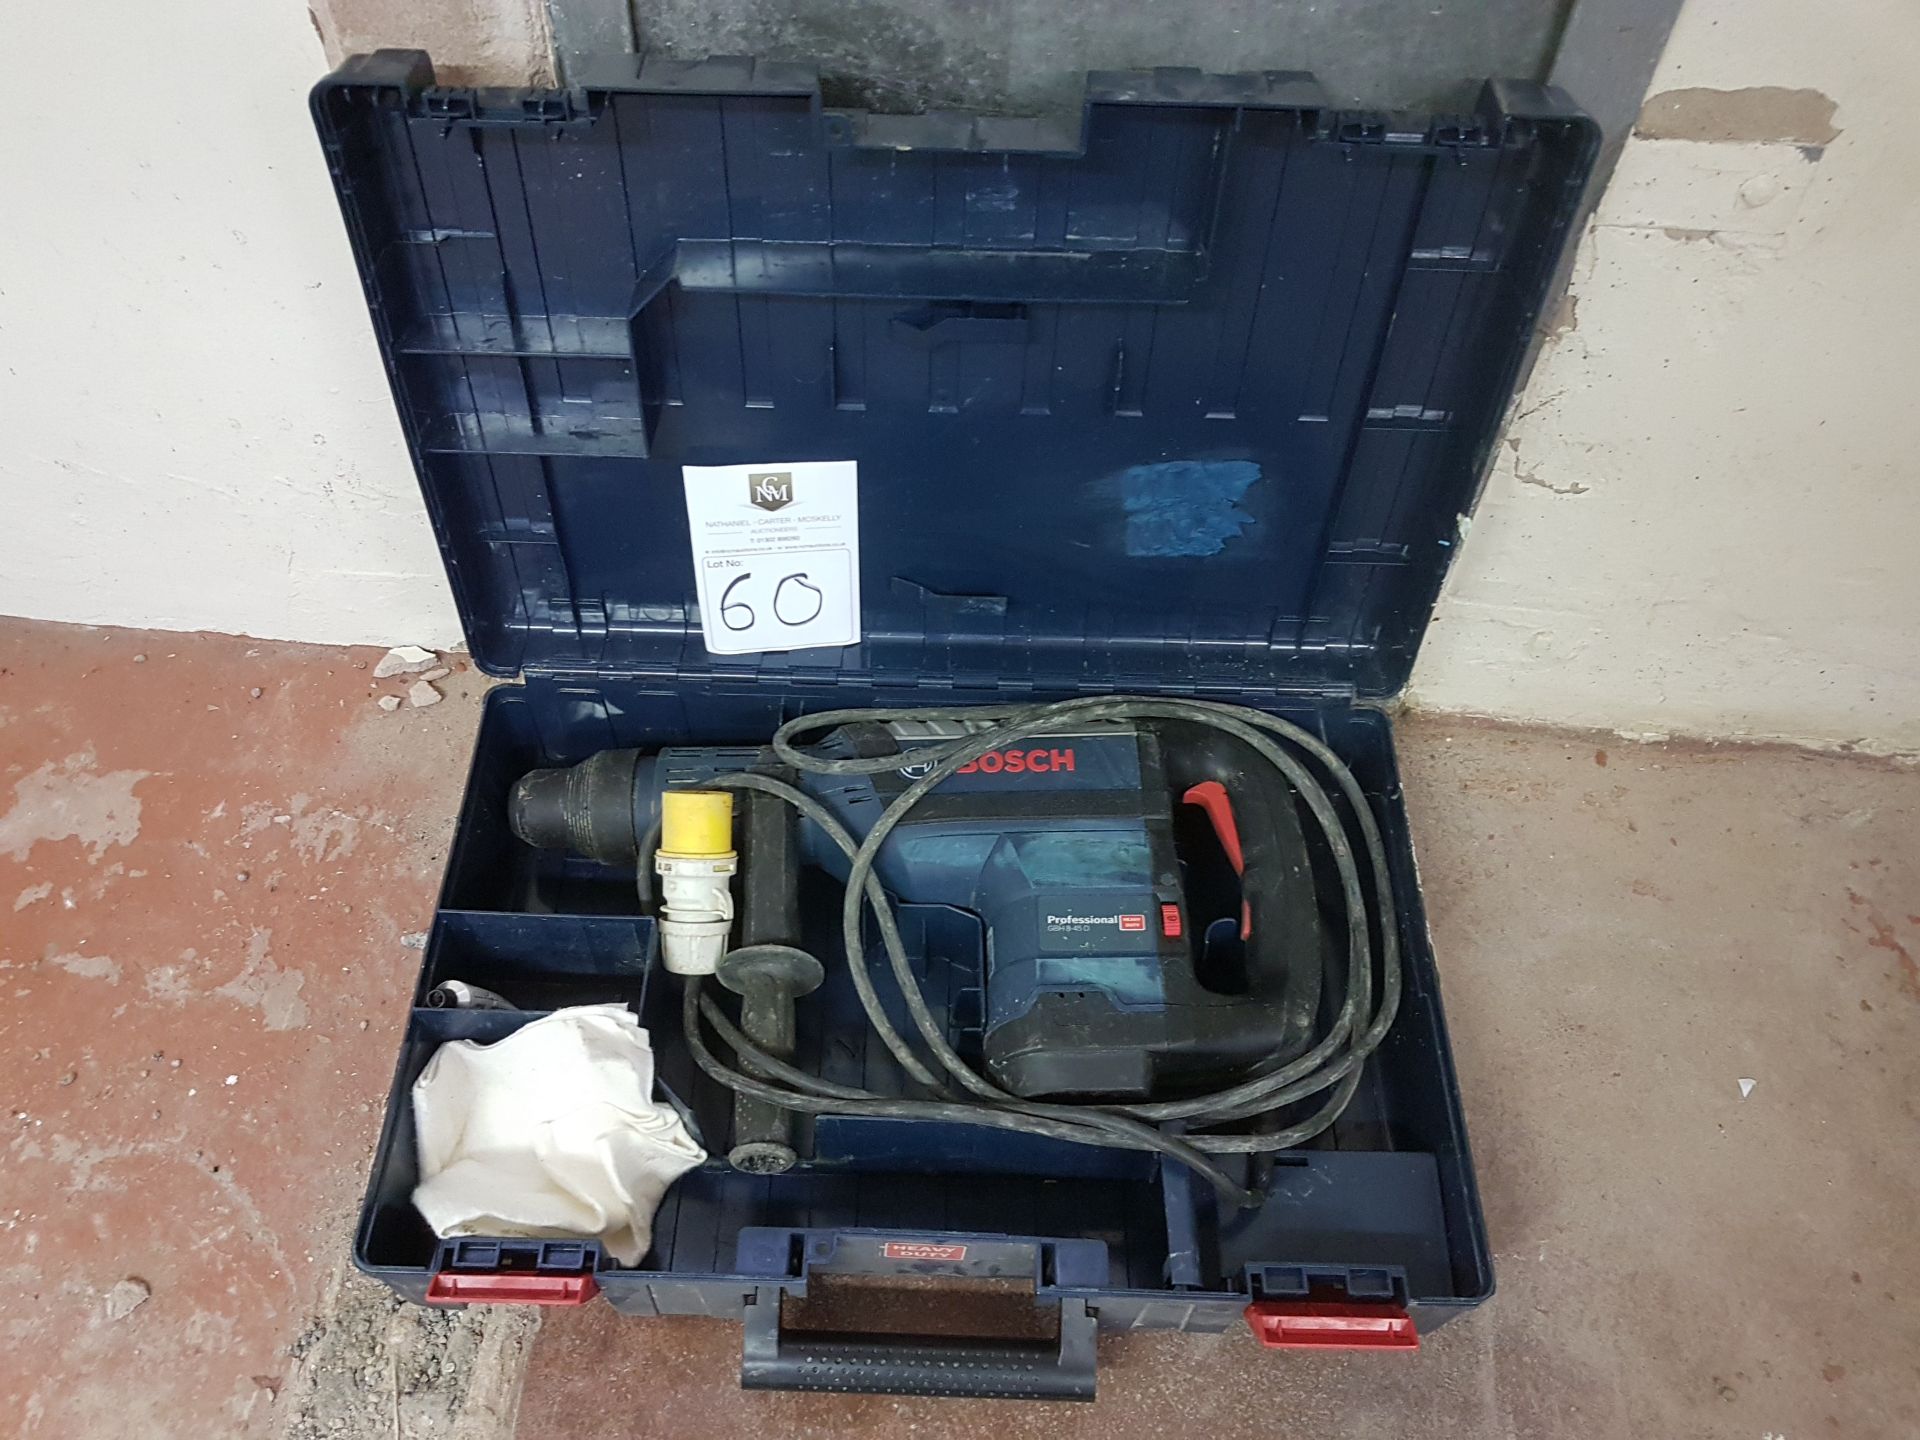 Bosch GBH 8 45 D 110v SDS / Hammer Drill in box - Tested / In working order